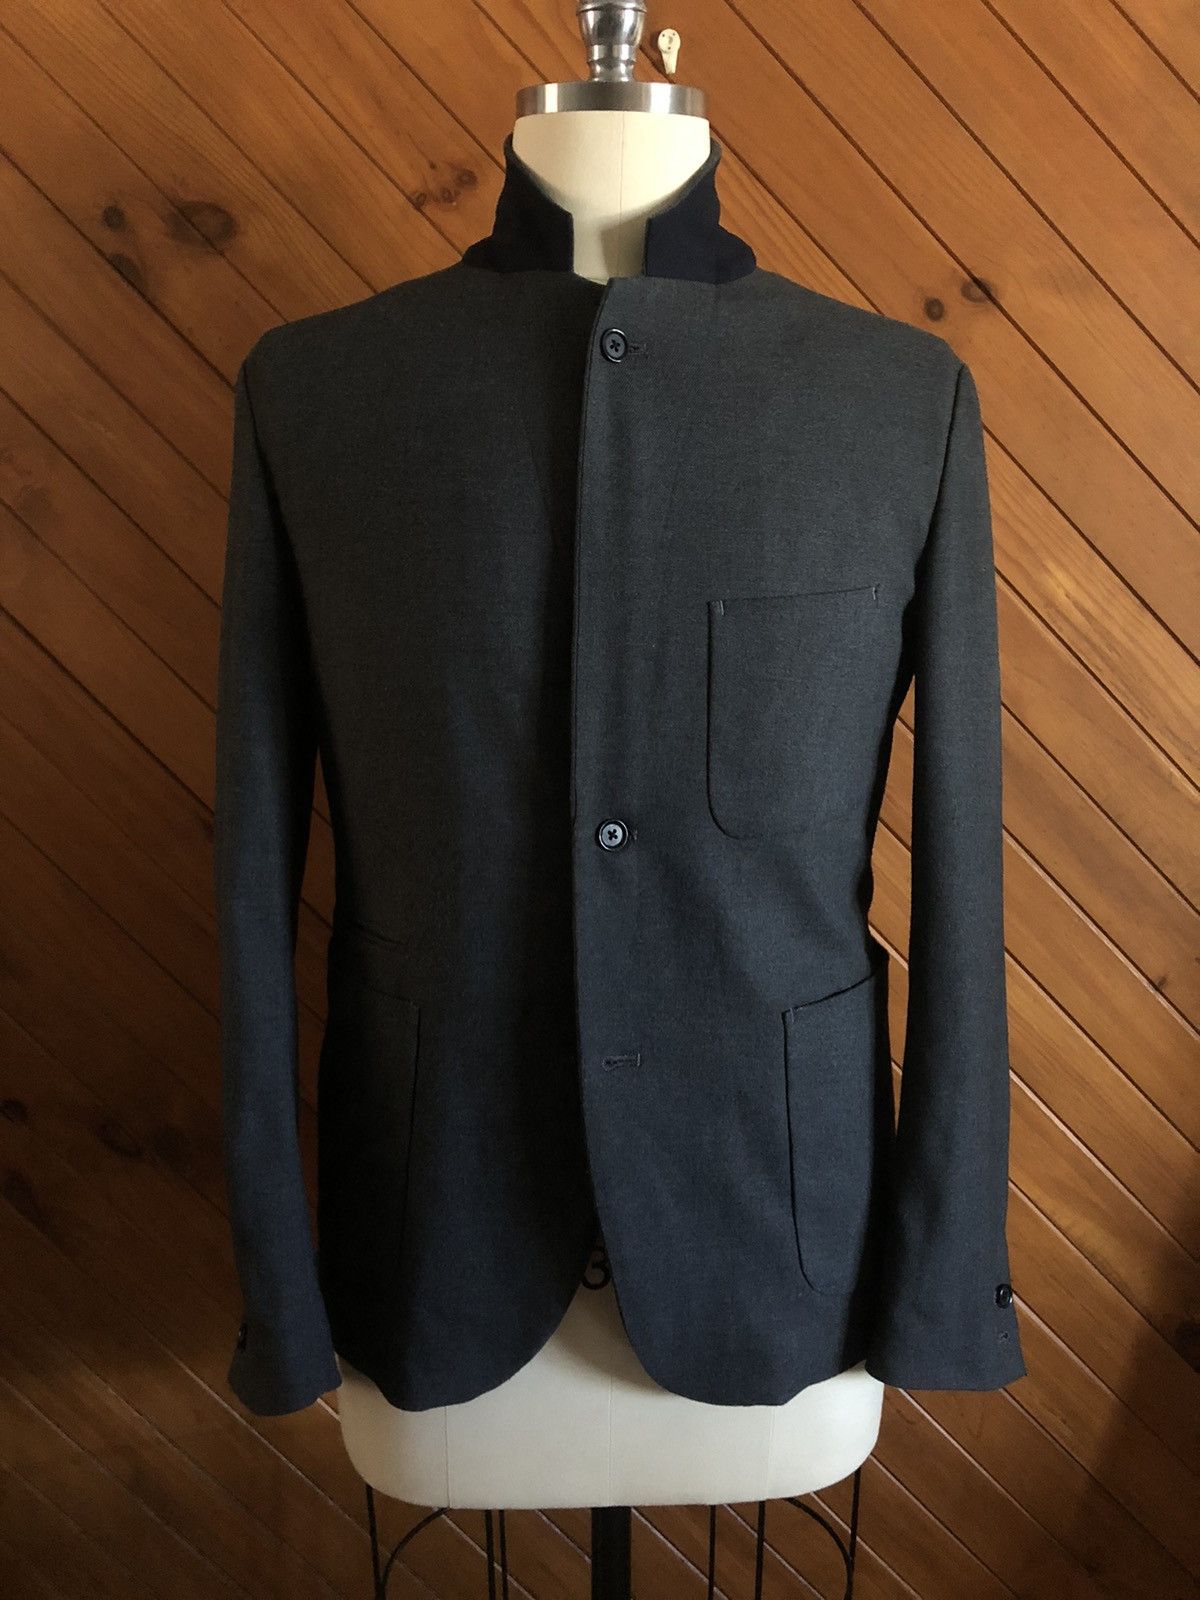 Japanese Brand A vontade / Easy Blazer Jacket / Made in Japan / sz M/L Size 38R - 2 Preview